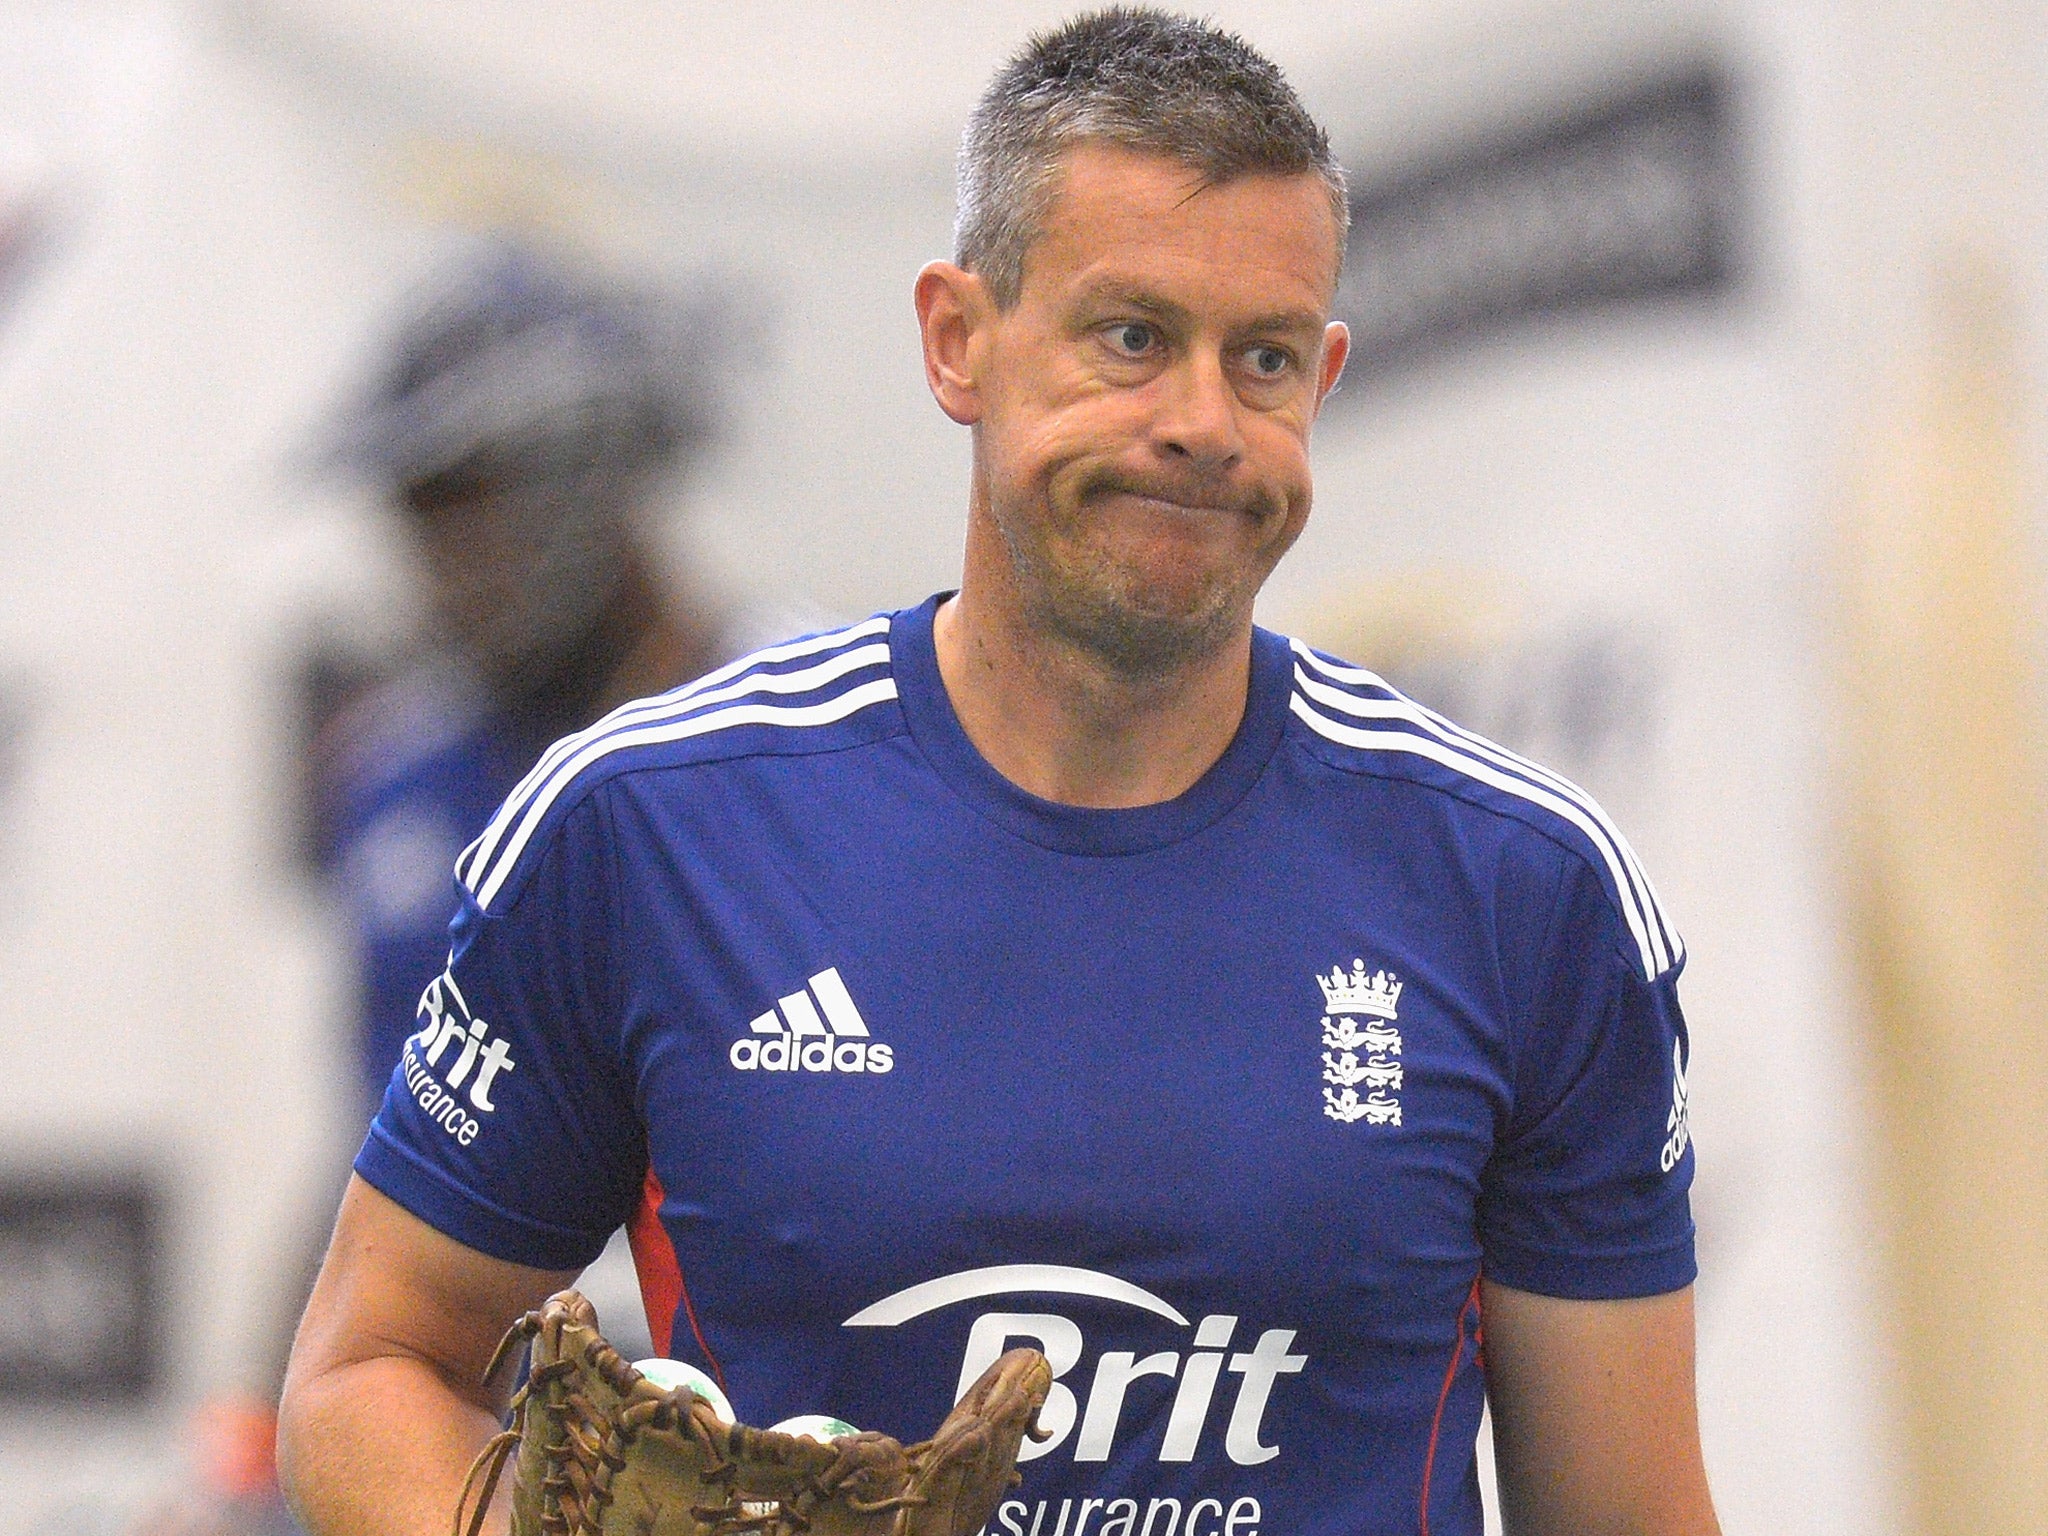 Ashley Giles: 'It was disappointing, but we move on. I do have bad days, but I still want England to do well'